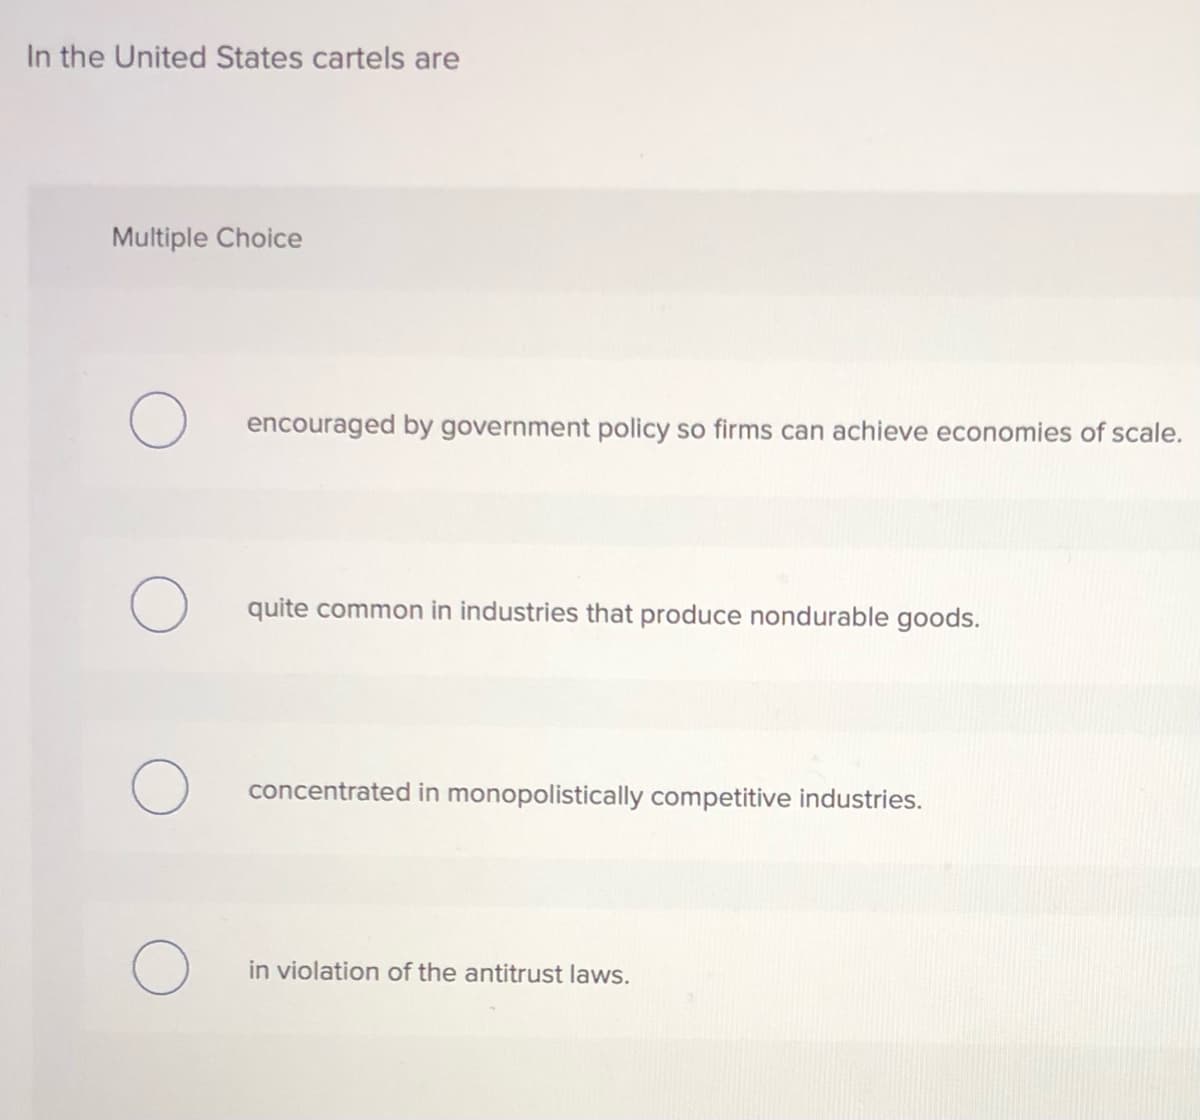 In the United States cartels are
Multiple Choice
encouraged by government policy so firms can achieve economies of scale.
quite common in industries that produce nondurable goods.
concentrated in monopolistically competitive industries.
in violation of the antitrust laws.
